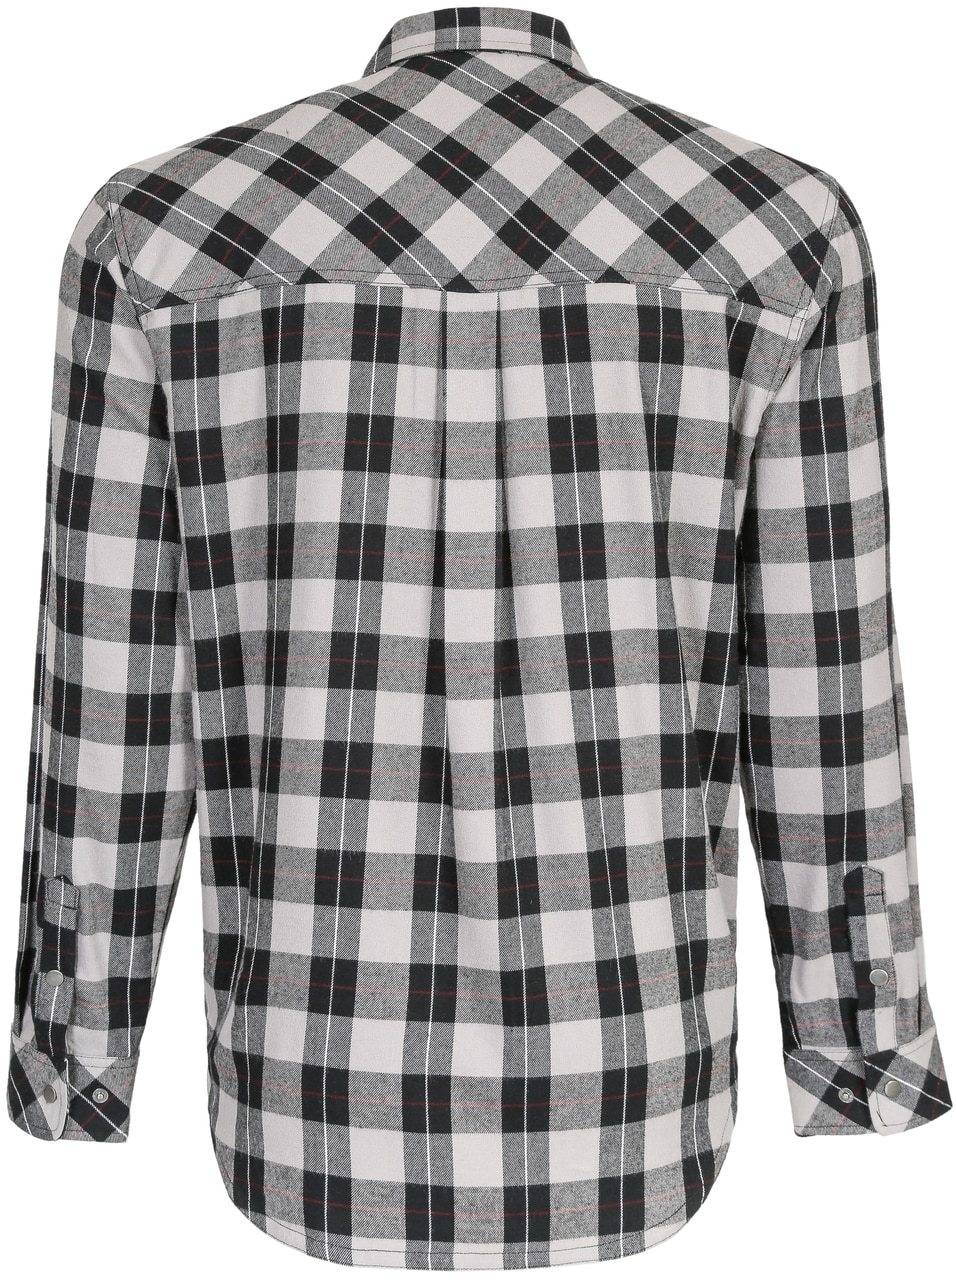 Men's L.A Logo Flannel Shirts Checkered Style Light Weight with